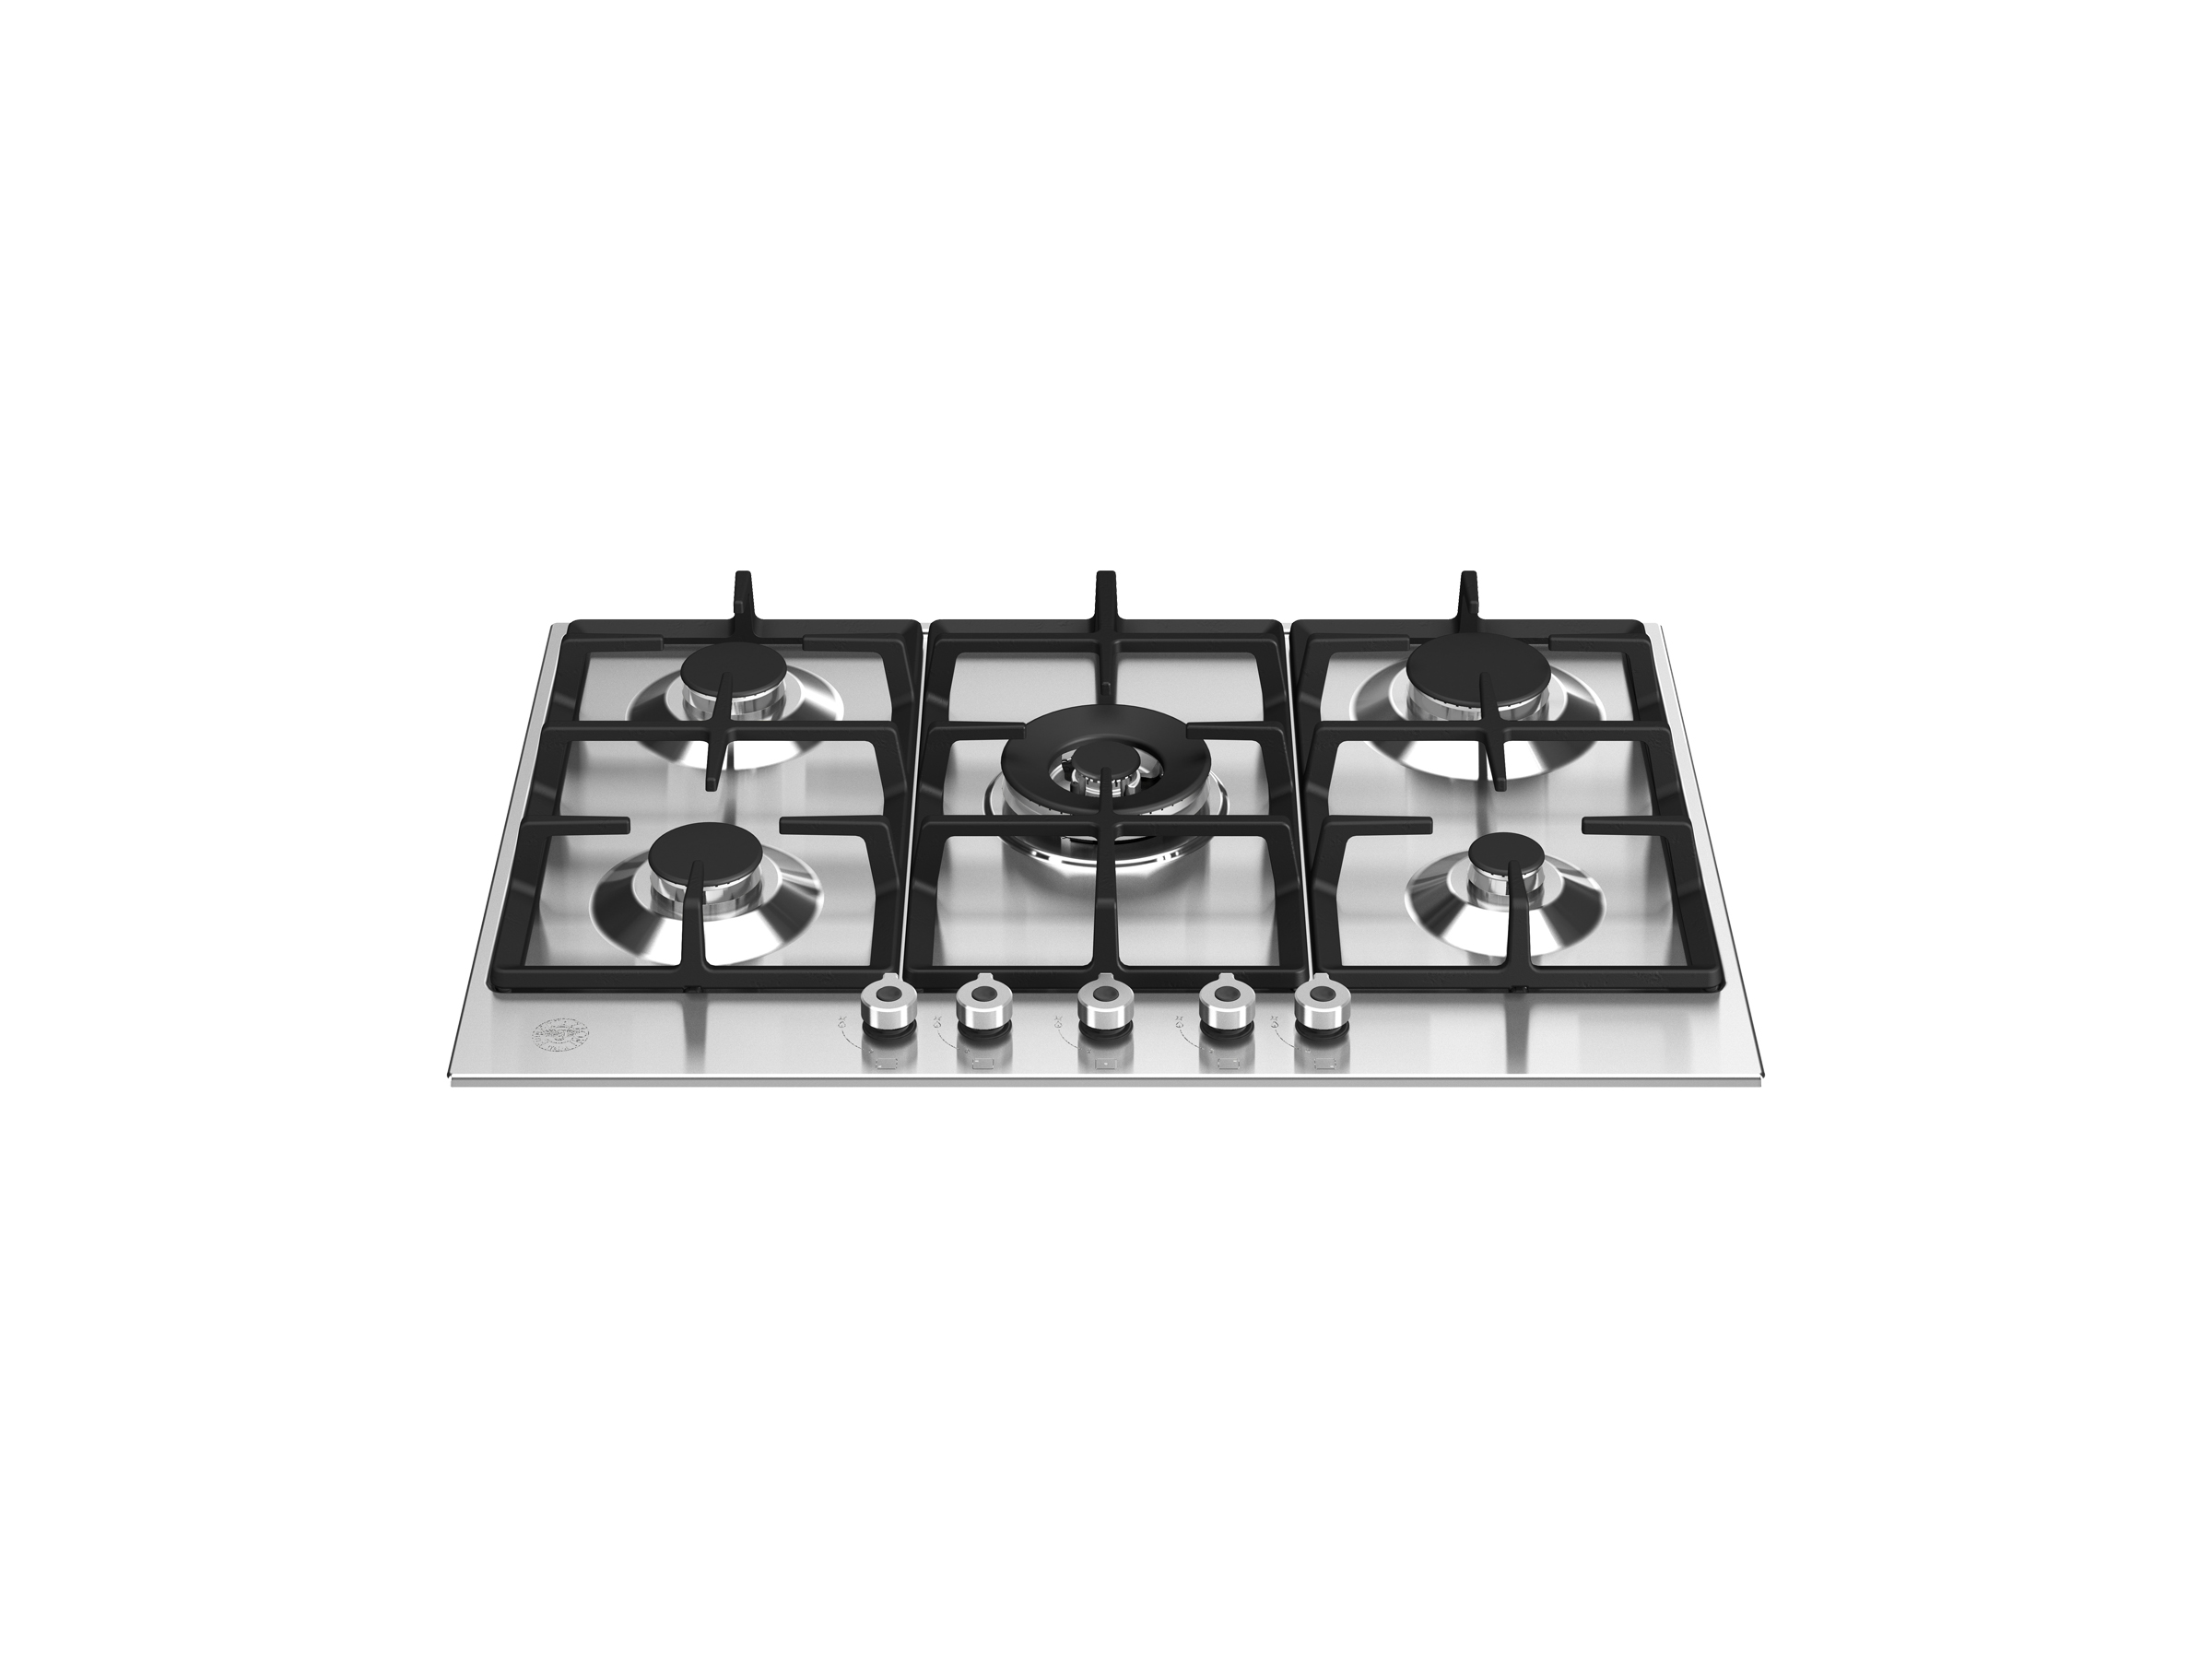 Deli-kit DK157-AA01 30 inch gas cooktop gas hob stovetop 5 Burners LPG/NG Dual Fuel 5 Sealed Burners Kitchen Tempered Glass Built-in gas hob 110V AC pulse ignition with cast iron support 